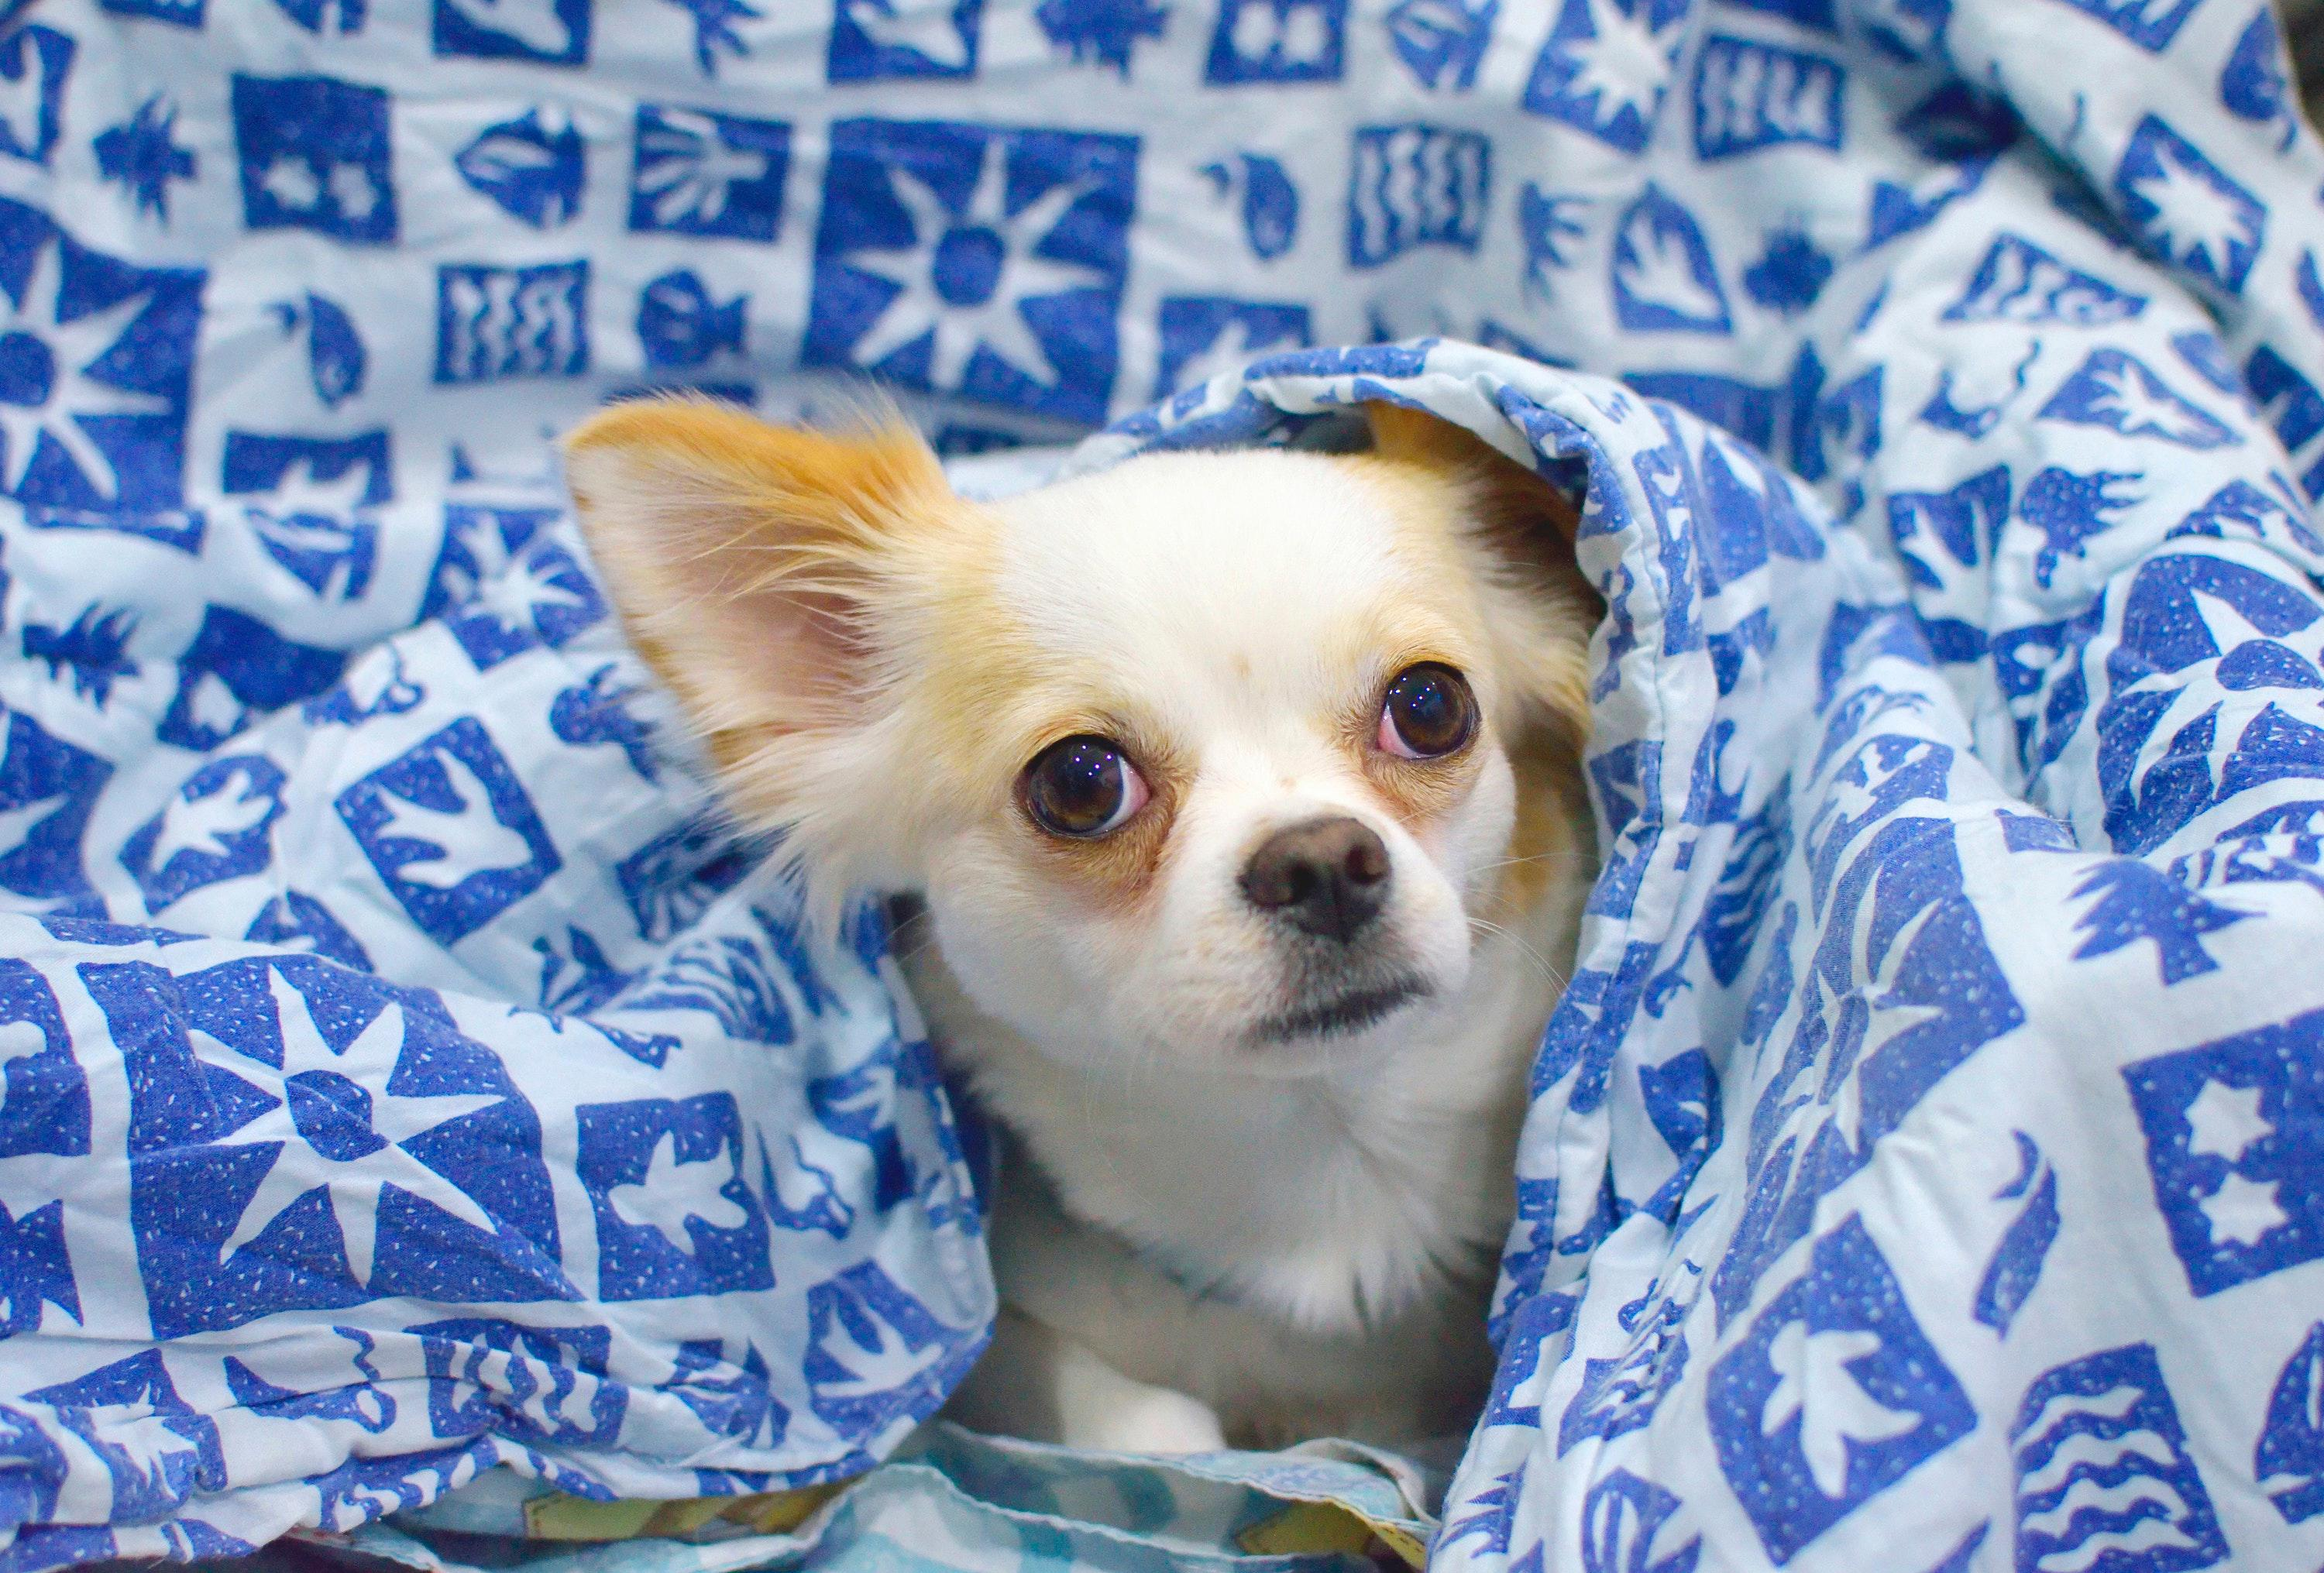 The Sweet Treat You Can Give to Your Chihuahua: Bananas!